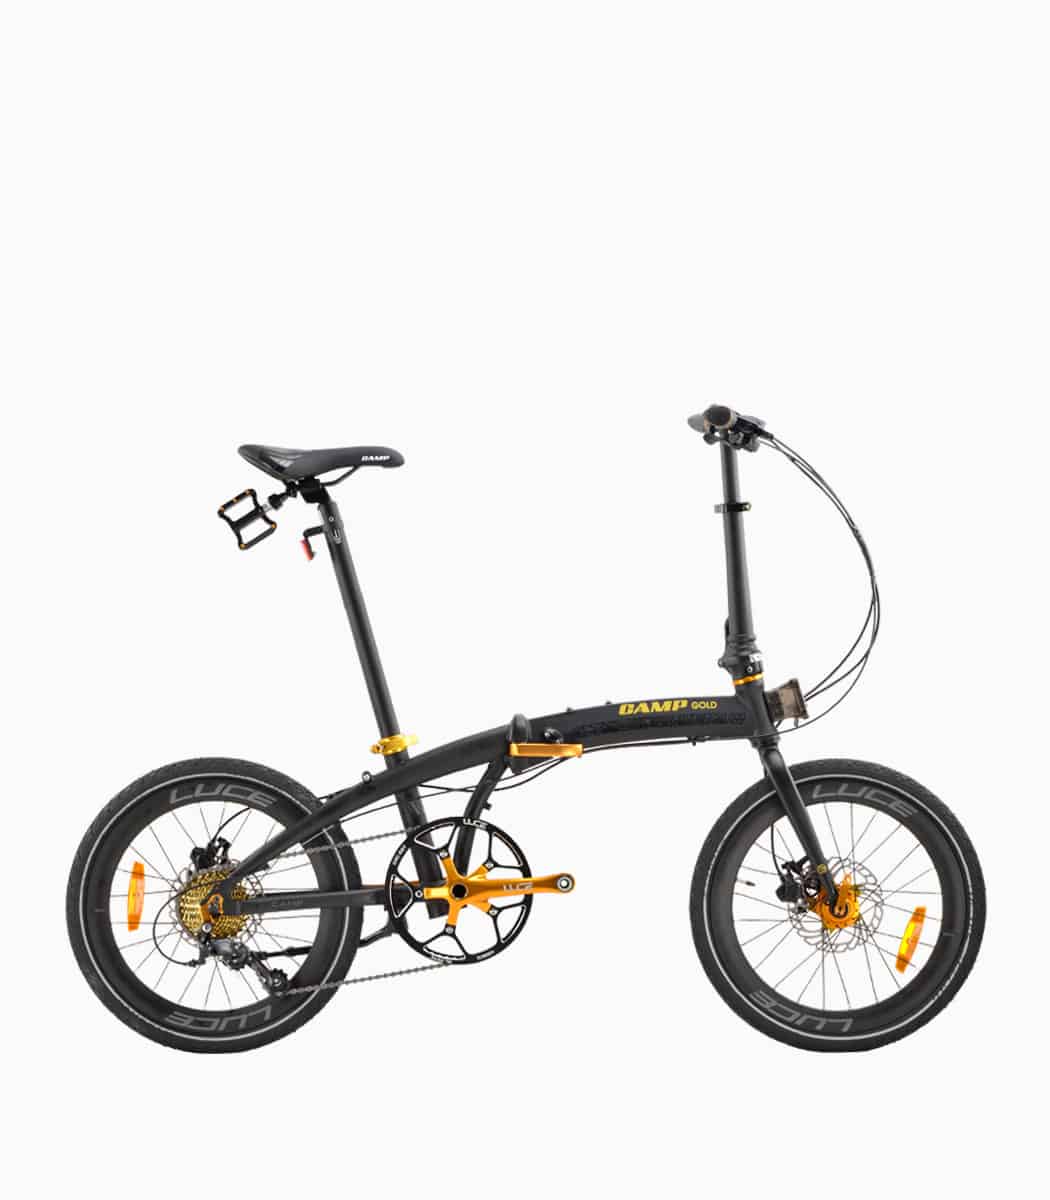 CAMP Gold 9S (BLACK) foldable bicycle